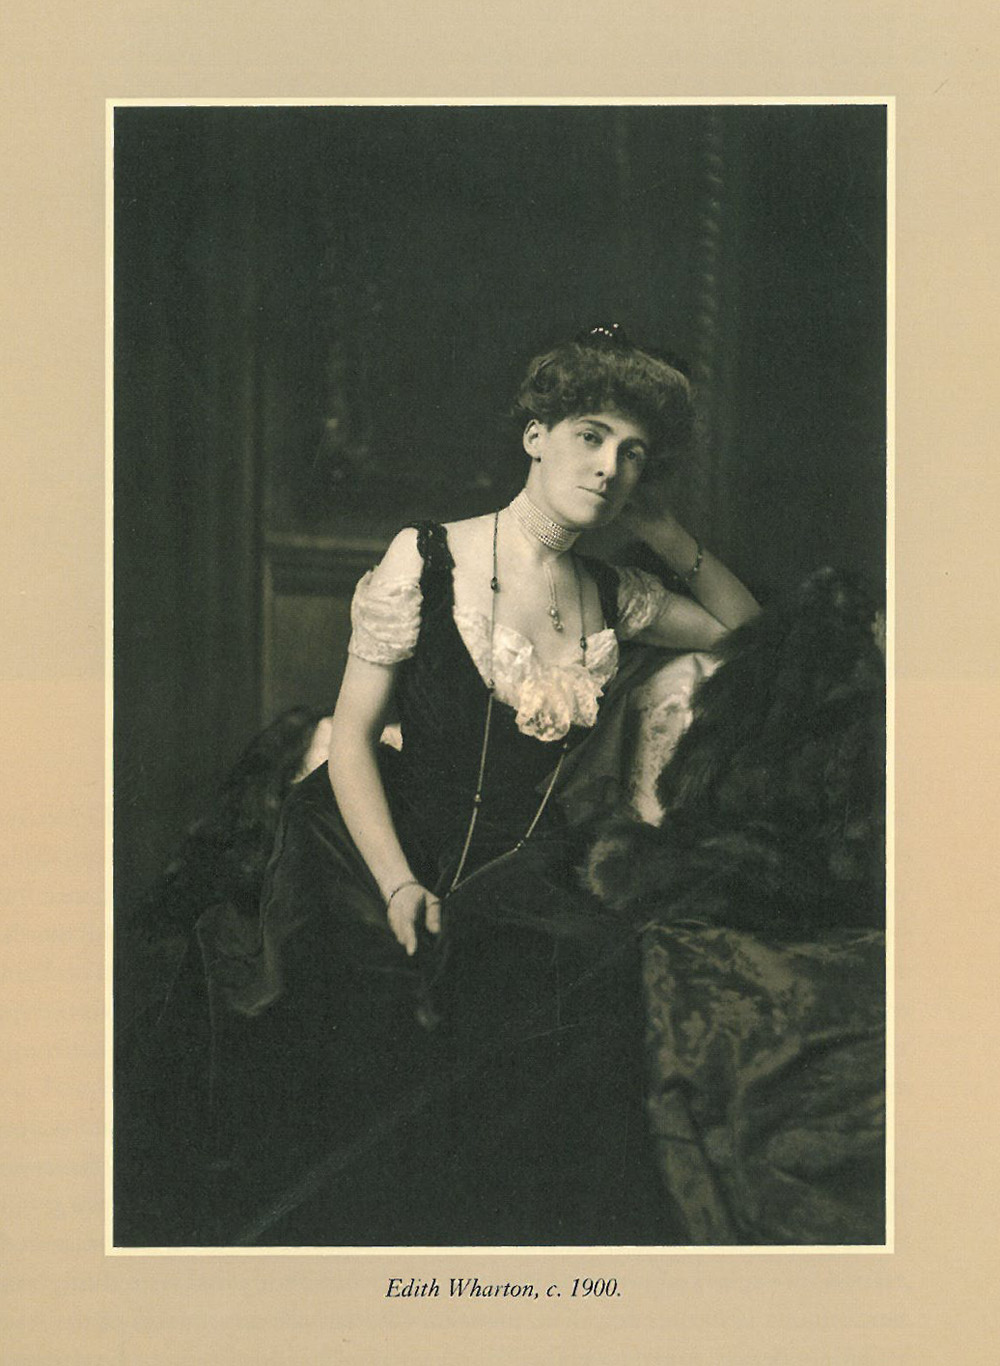 Edith Wharton, as she was busy planning her Dream Home. Image courtesy of "Edith Wharton at Home:Life at The Mount" by Richard Guy Wilson.